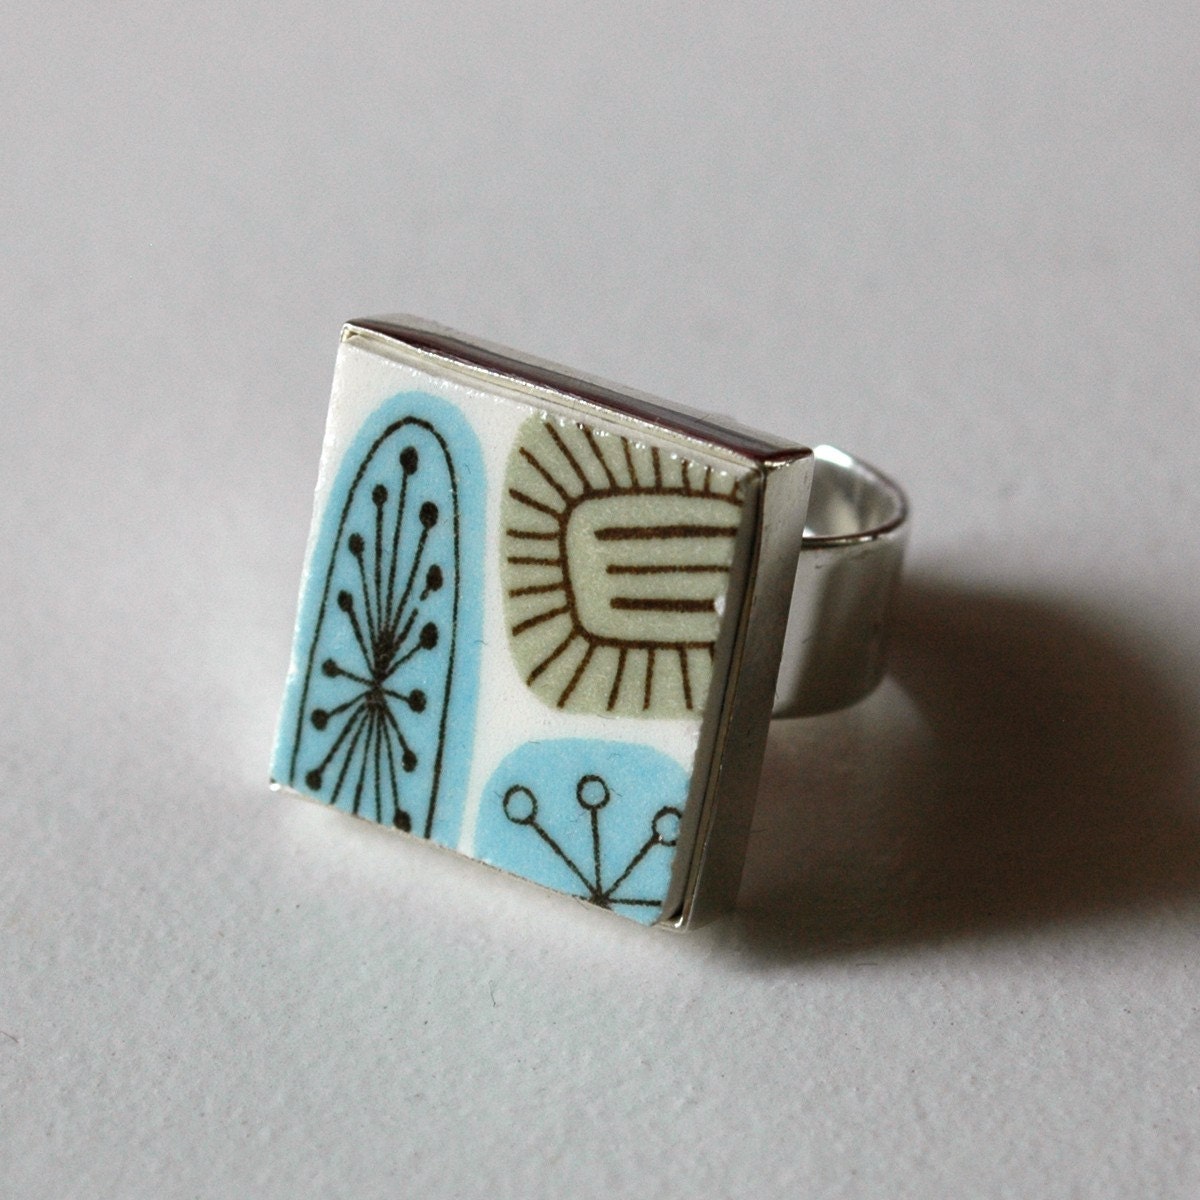 New Square Broken Plate Ring blue and green 50s atomic